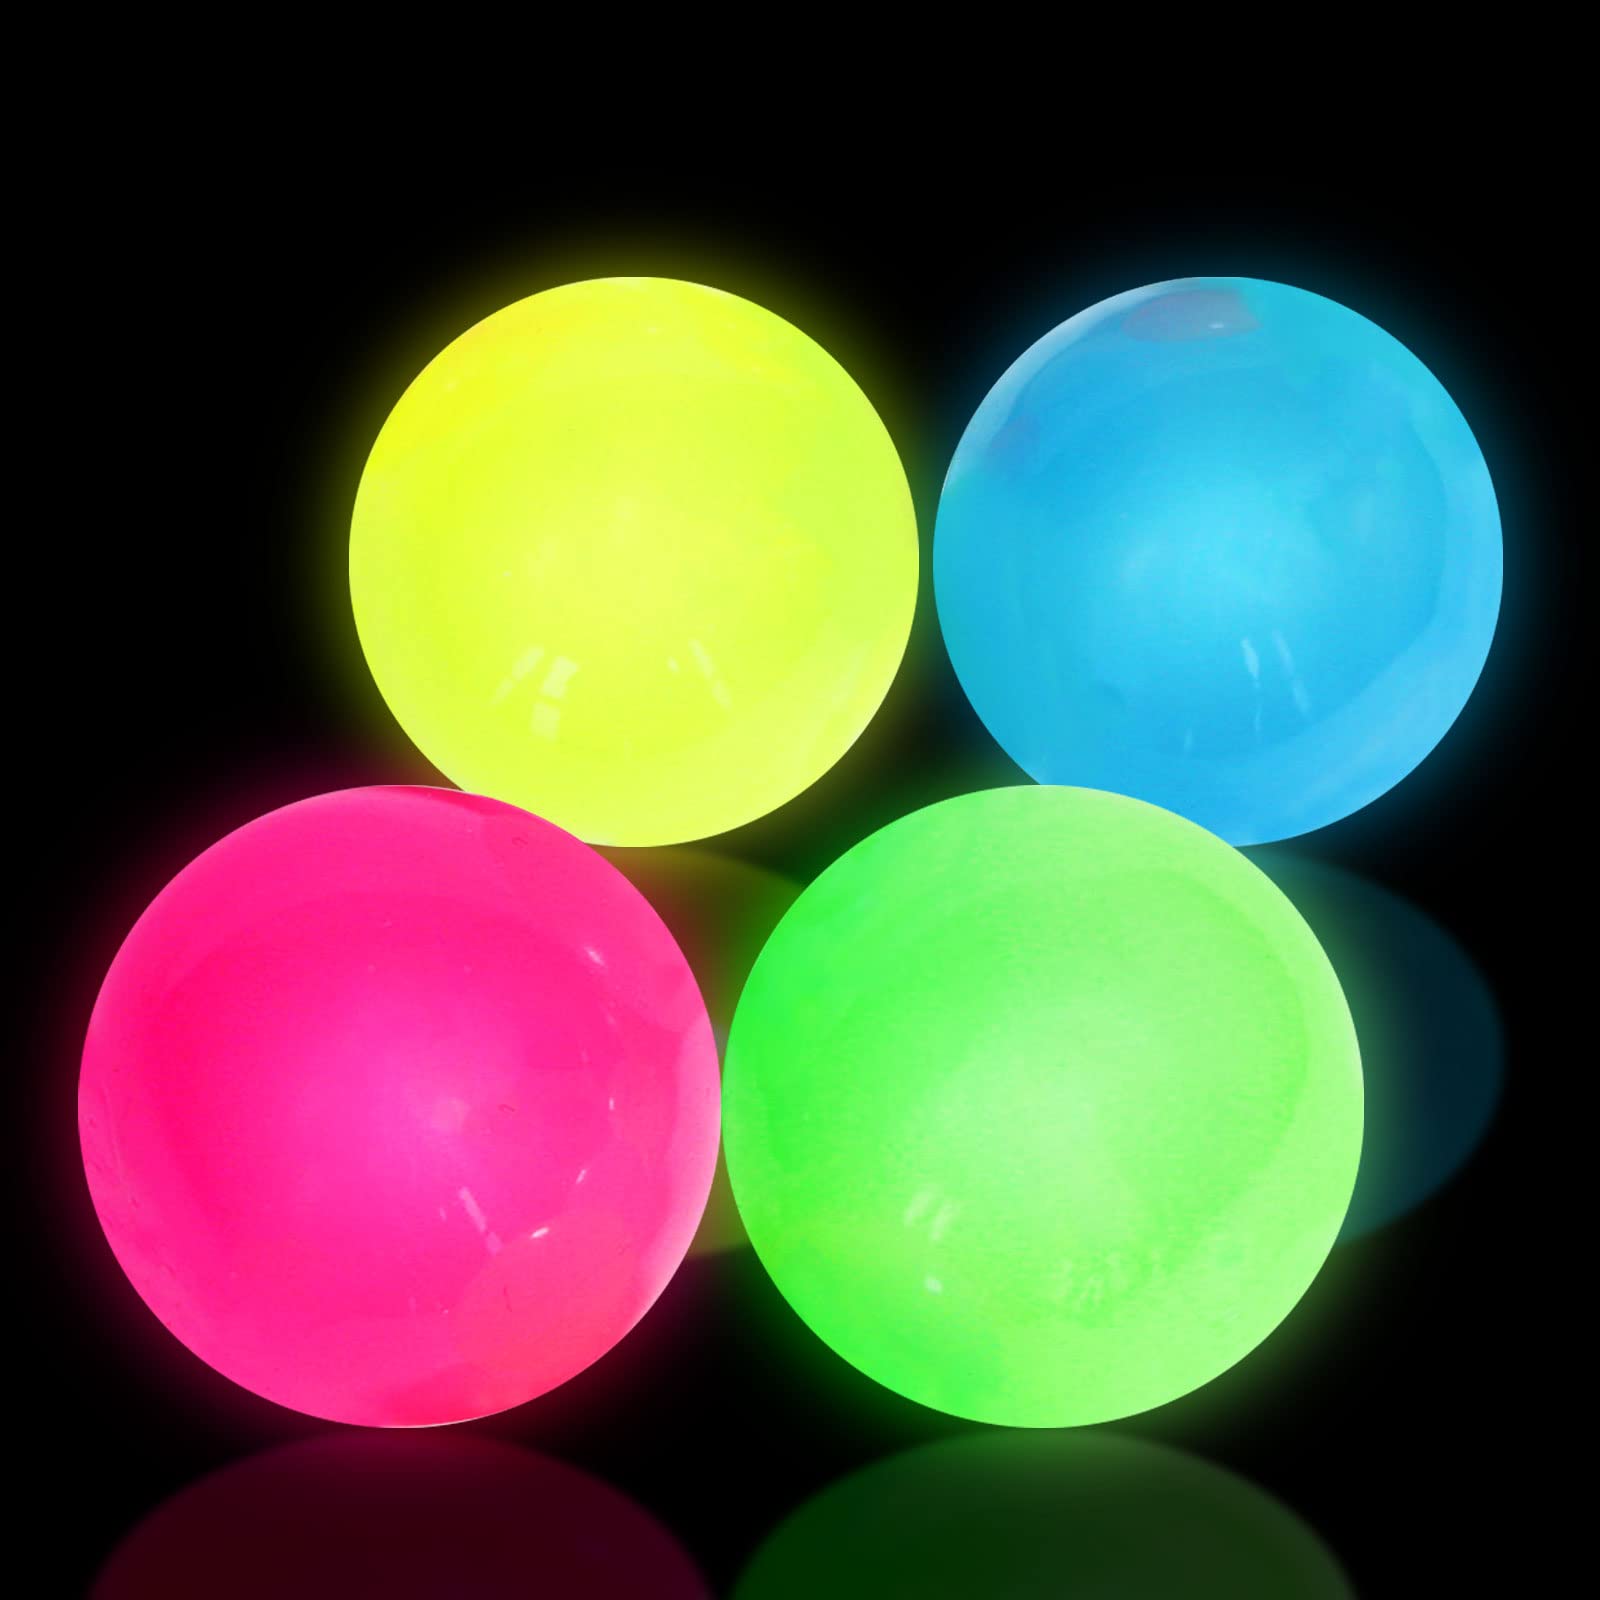 4 Pcs Ceiling Balls Glowing Sticky Balls, Stress Balls Glow in The Dark Toys Stick to The Ceiling, Luminous Stress Relieving Balls Fun Decompression Fidget Toy for Kids and Adults Anxiety Pressure